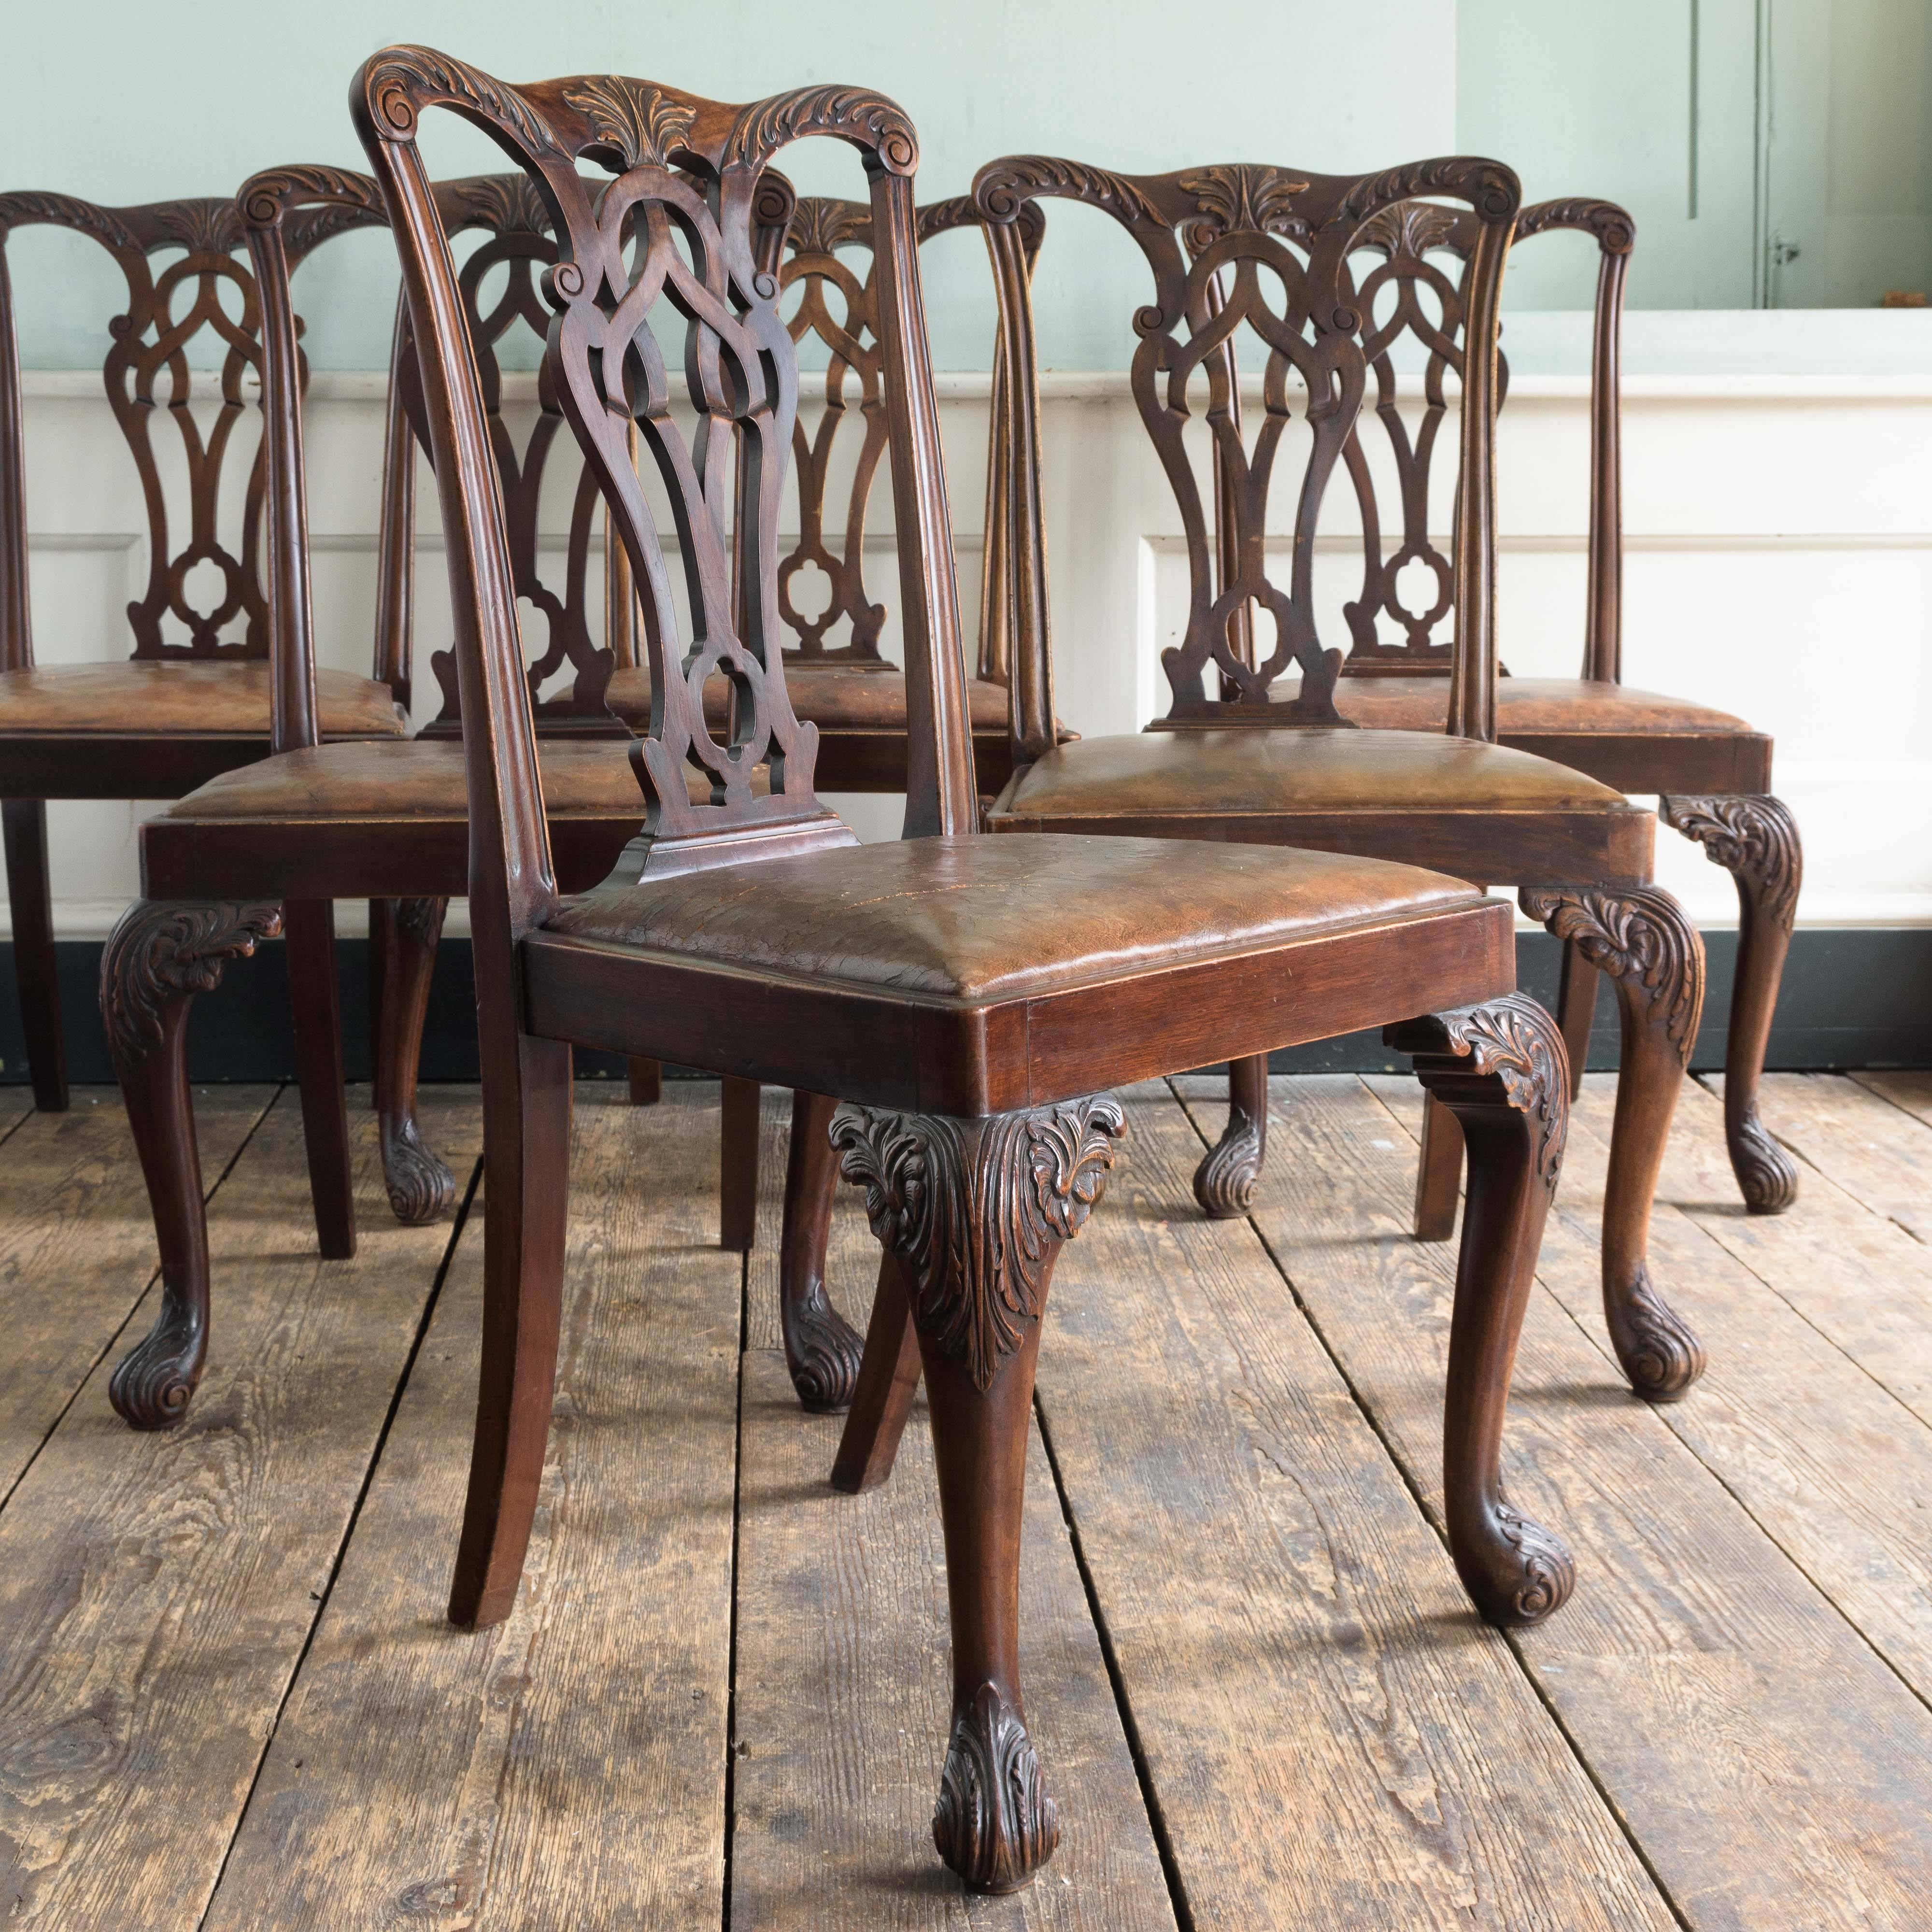 Great Britain (UK) Set of Six George III Style Chairs